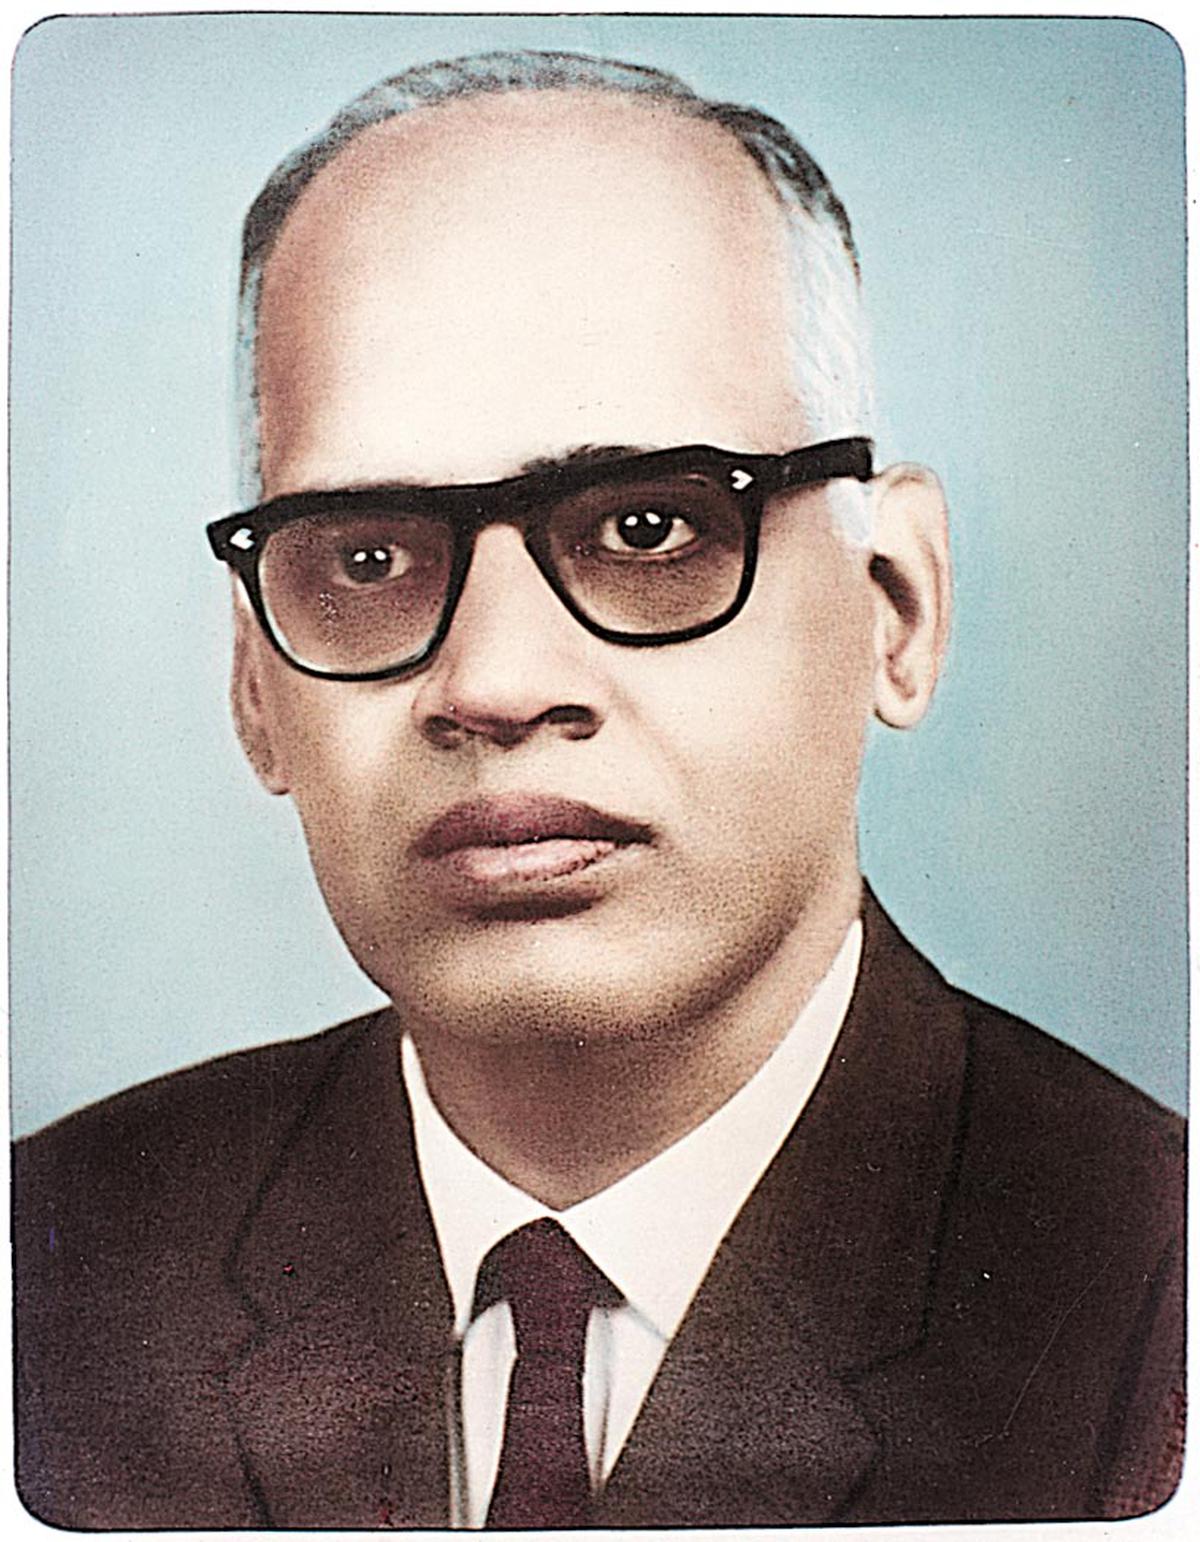 Triple helix: the story of G.N. Ramachandran, a deprived genius